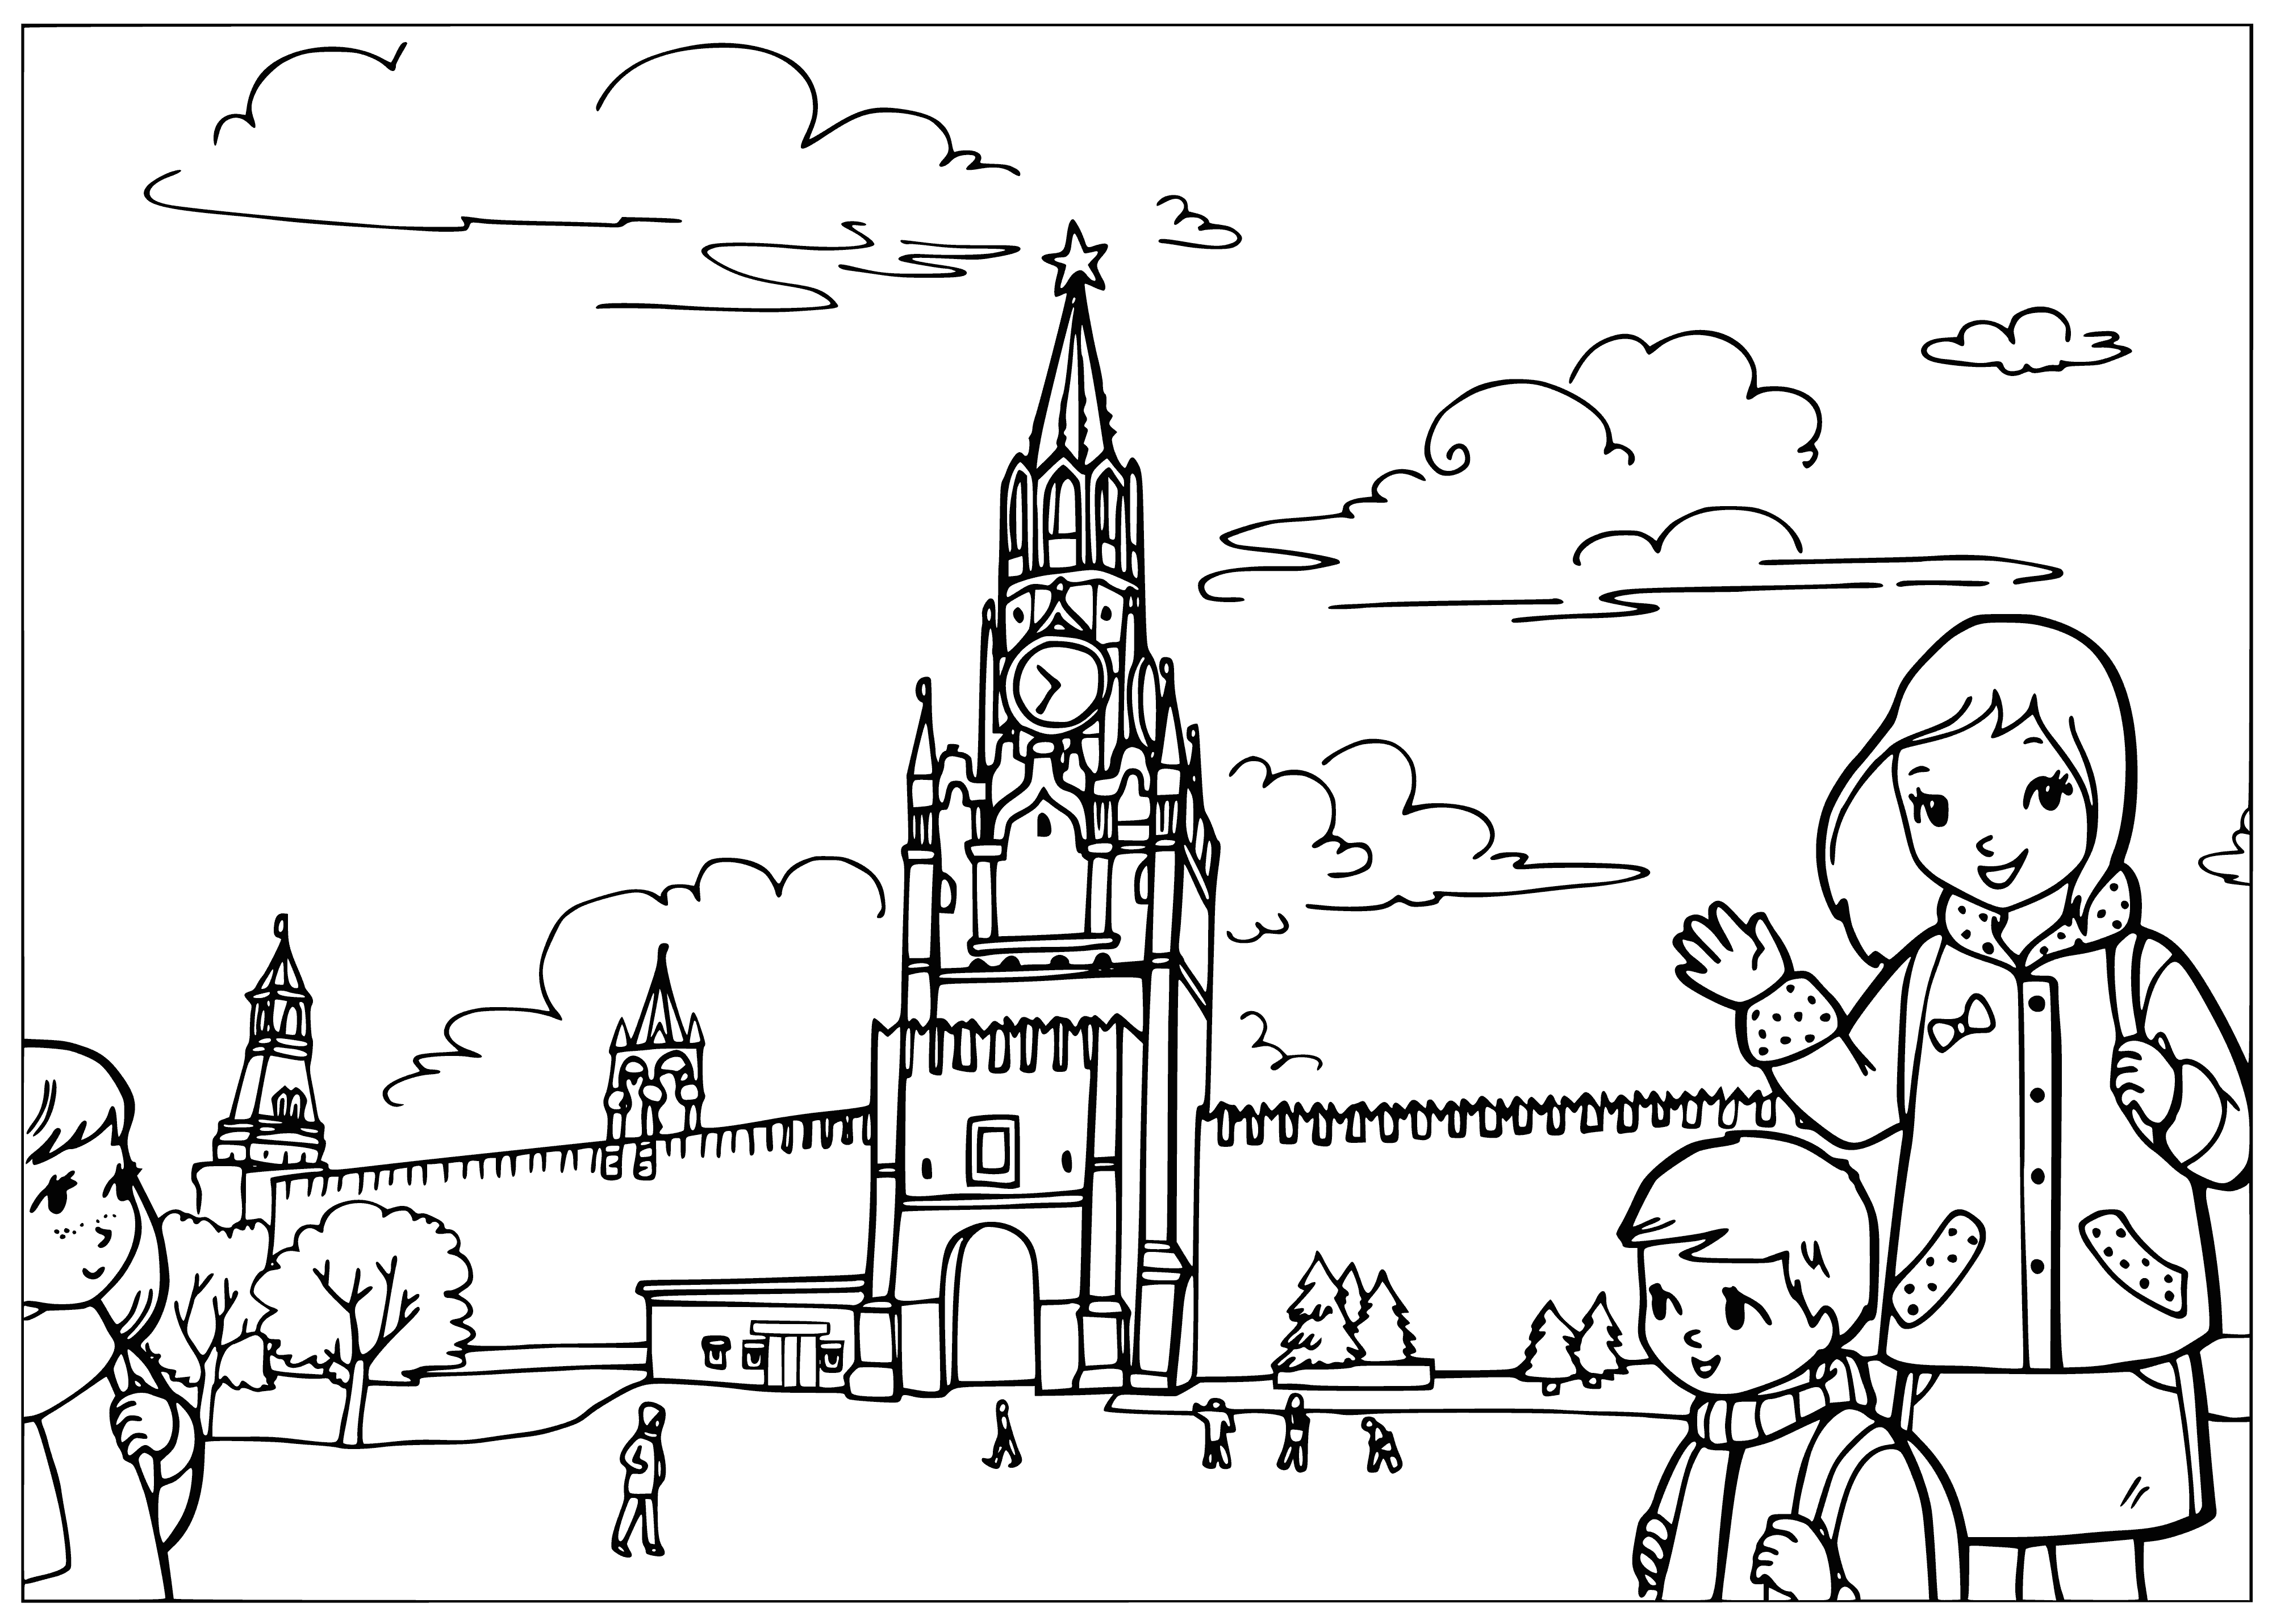 coloring page: The Kremlin is Moscow's iconic complex of buildings & cathedrals, home to the President & a museum. It overlooks the Moskva River, with high walls & towers standing out in the cityscape.